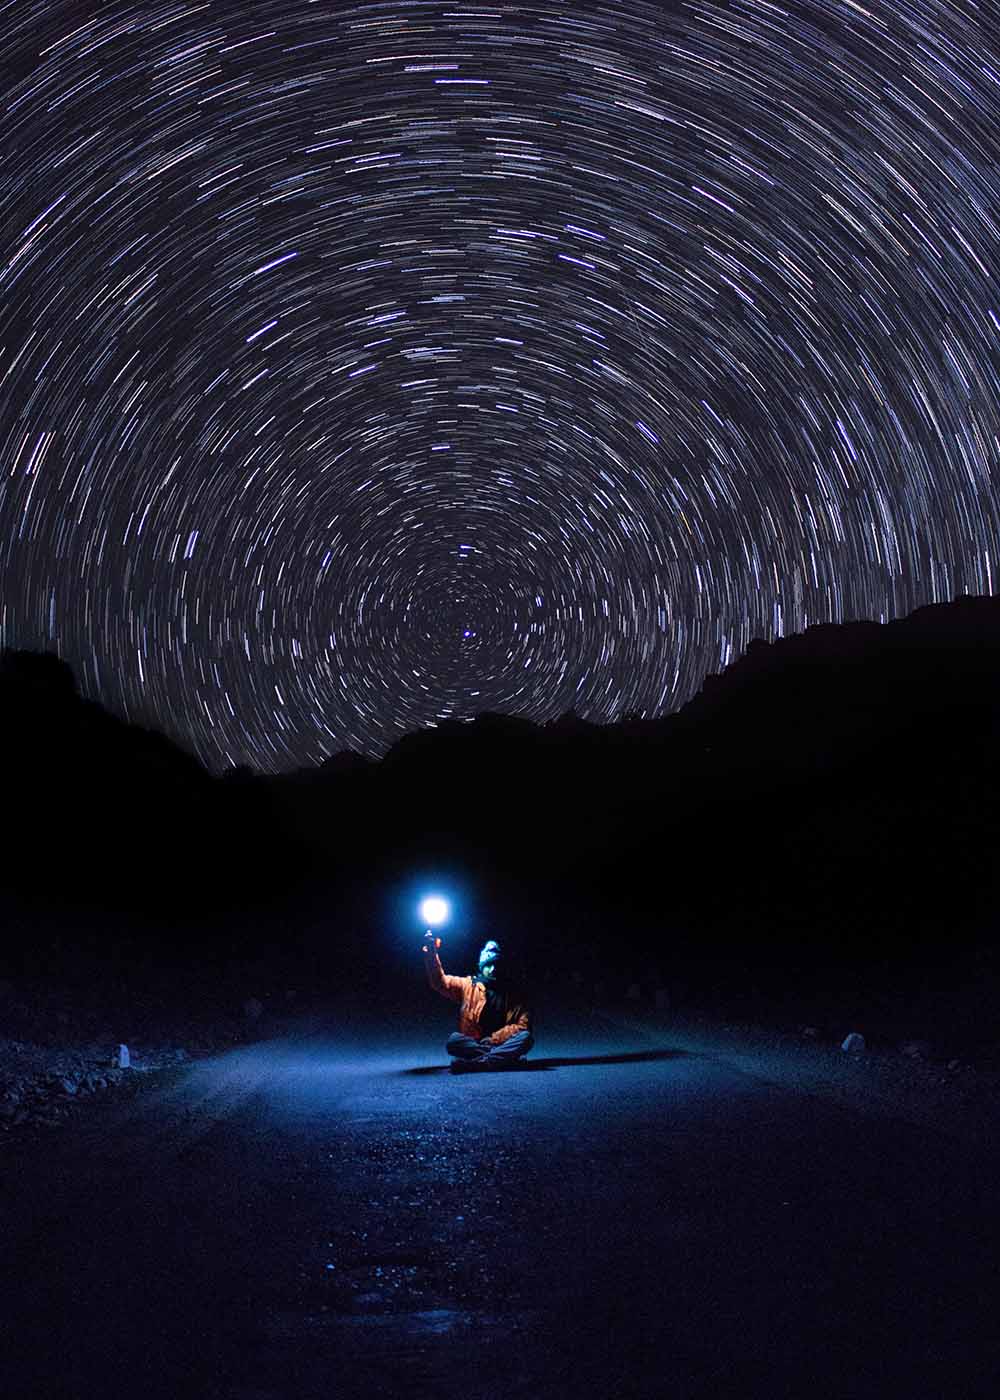 Night sky with circular star trails with silhouette of a hill. In the foreground a person sits on the road cross legged holding up a lamp.